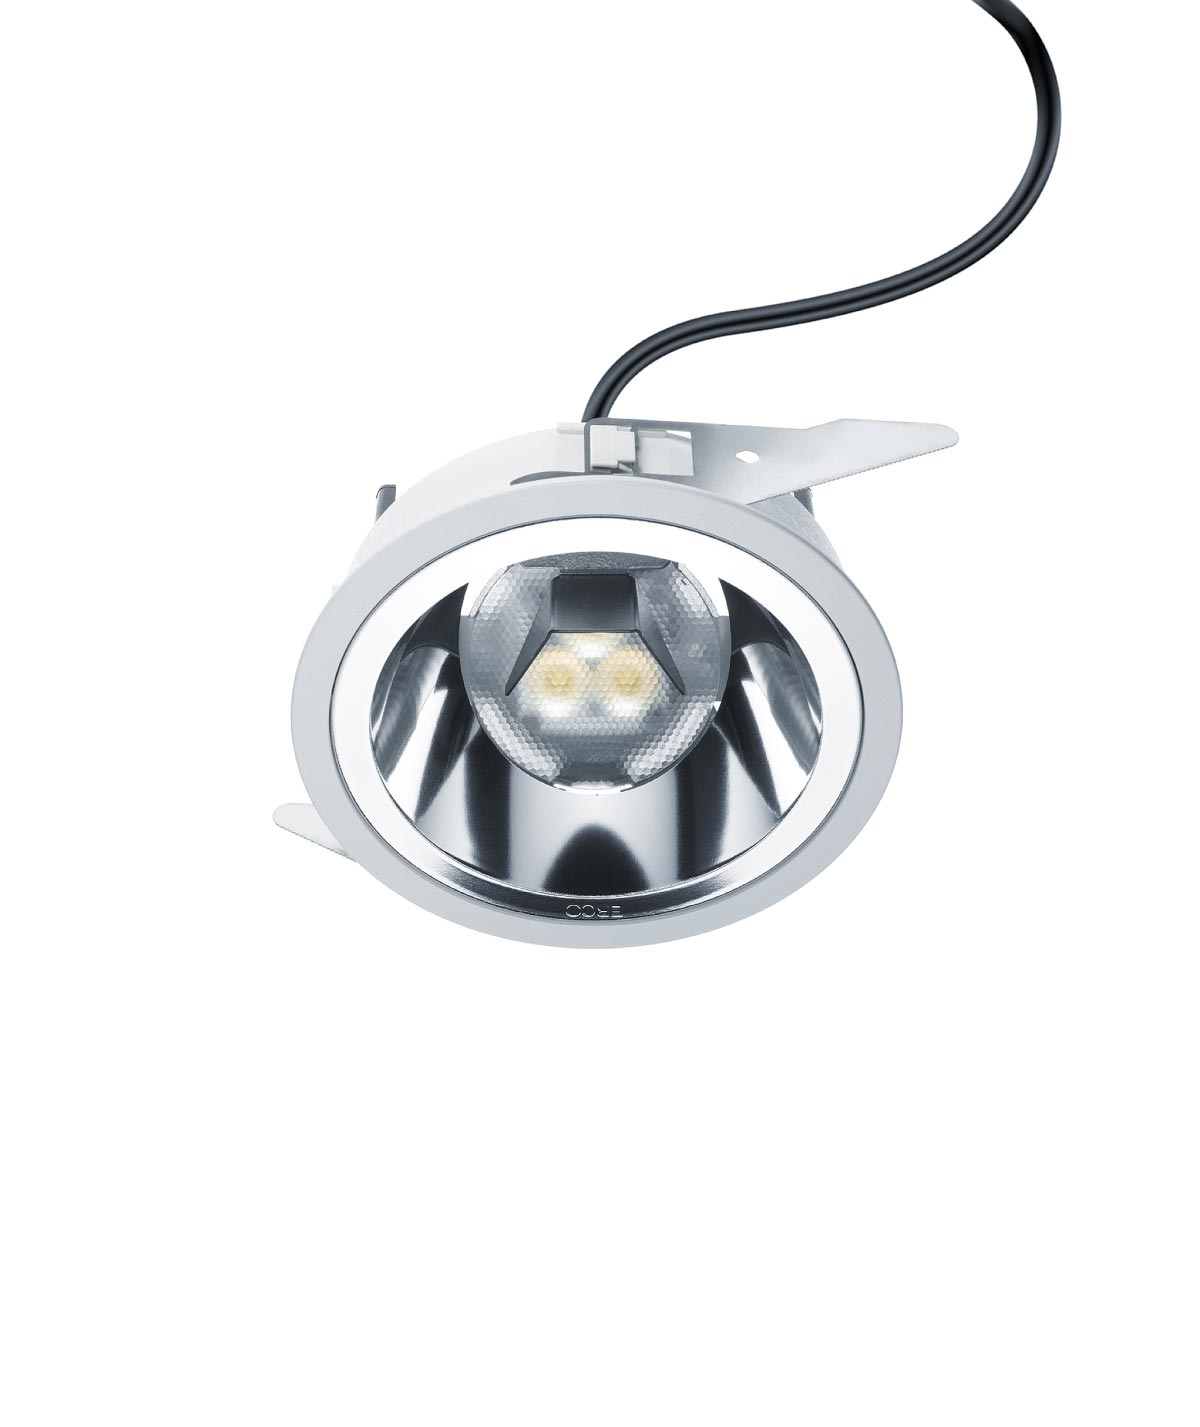 Quintessence Round Directional Luminaire Size 7 40° LED 24W 2520lm 3000K Warm White Dimmable